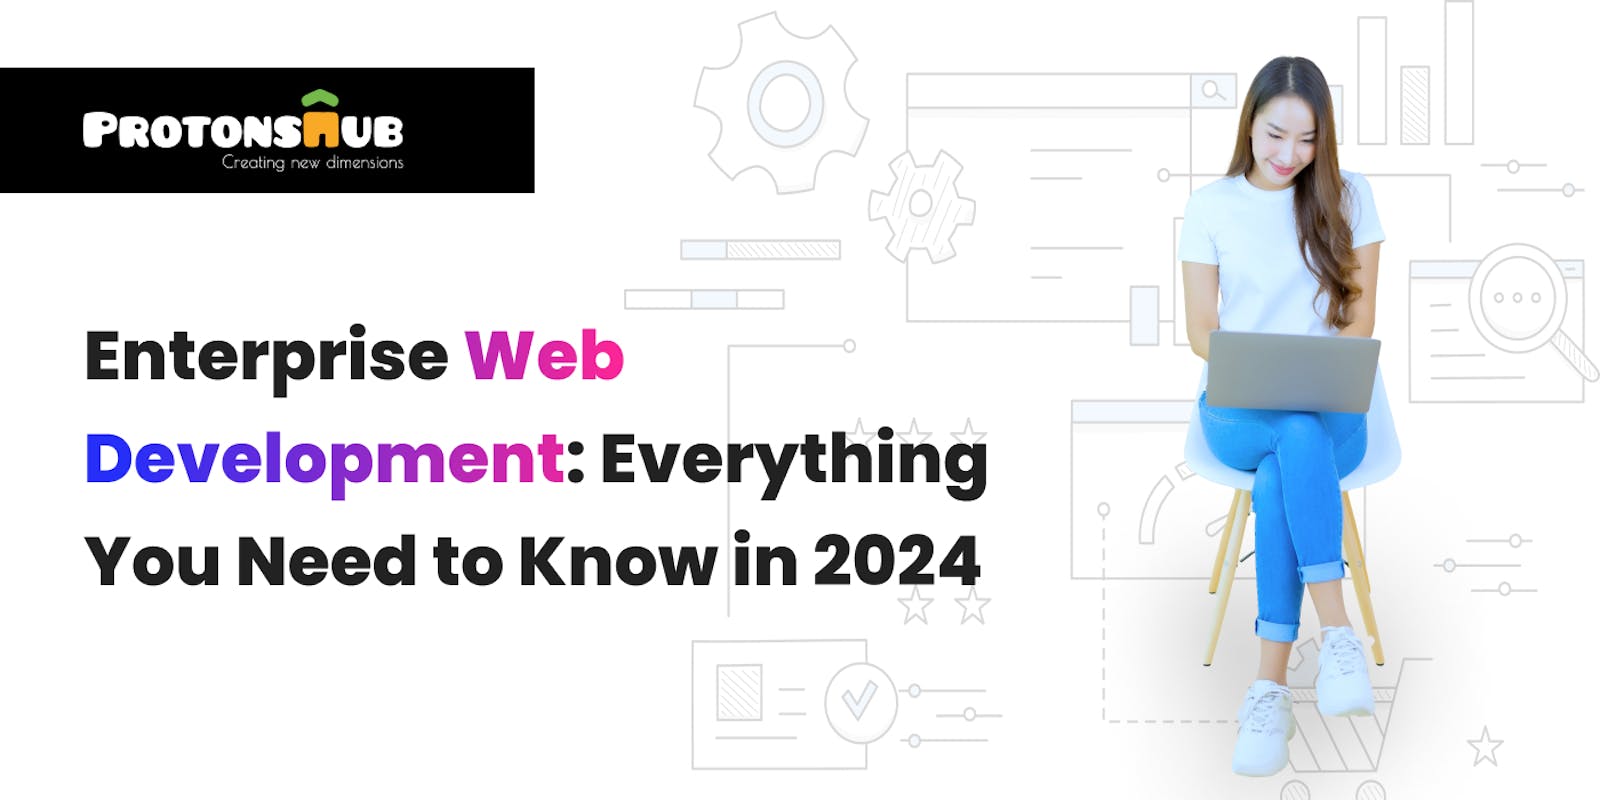 Enterprise Web Development: Everything You Need to Know in 2024